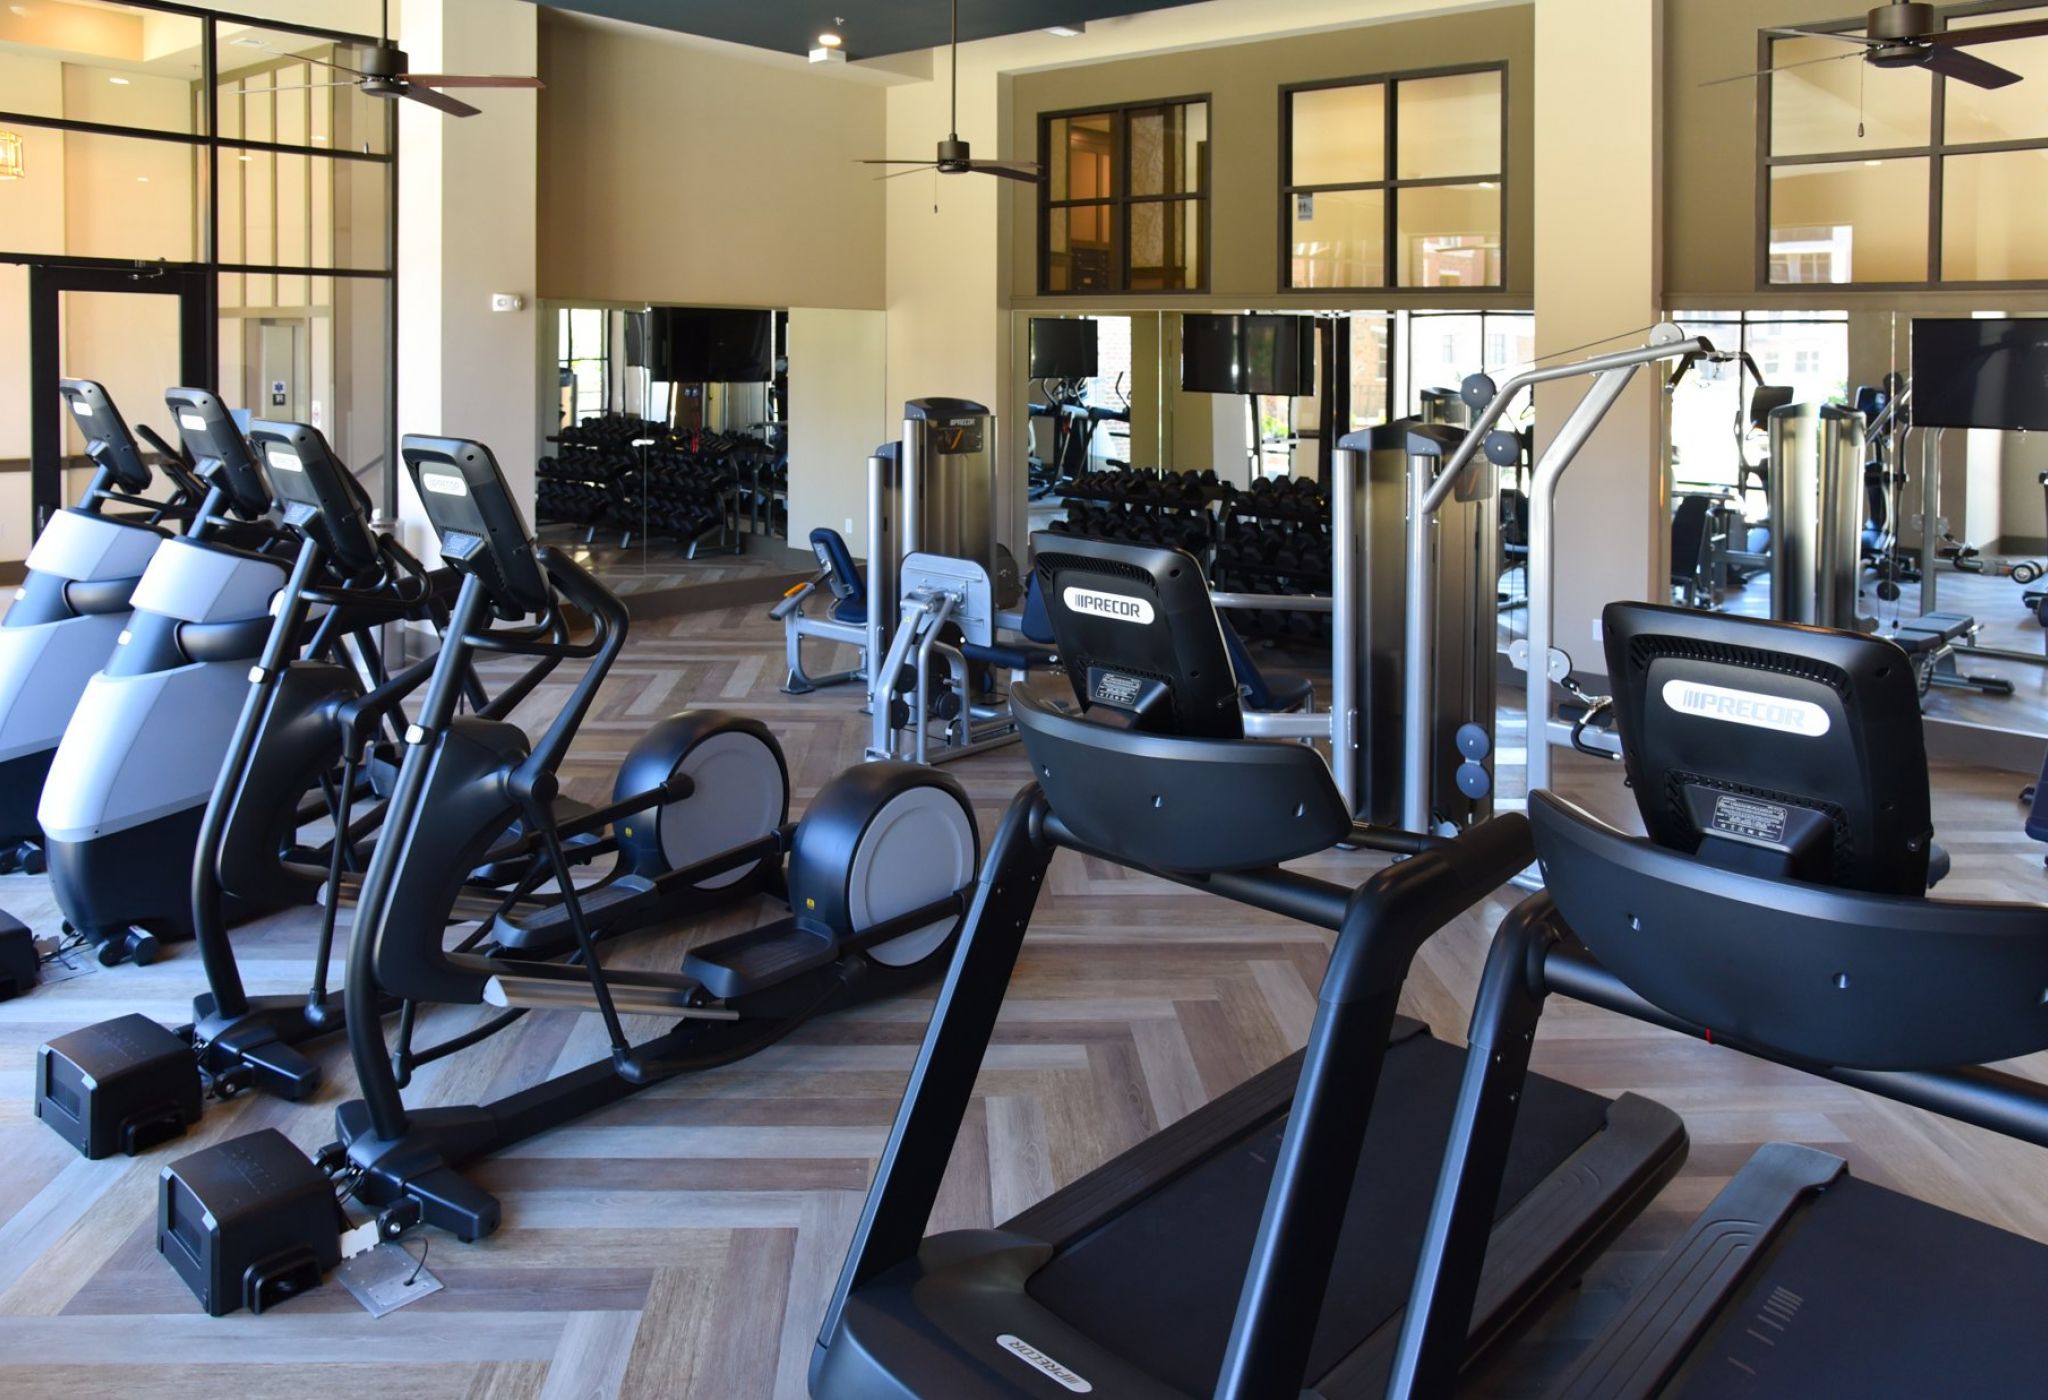 Cardio equipment including ellipticals, stair steppers, and treadmills inside large apartment fitness center